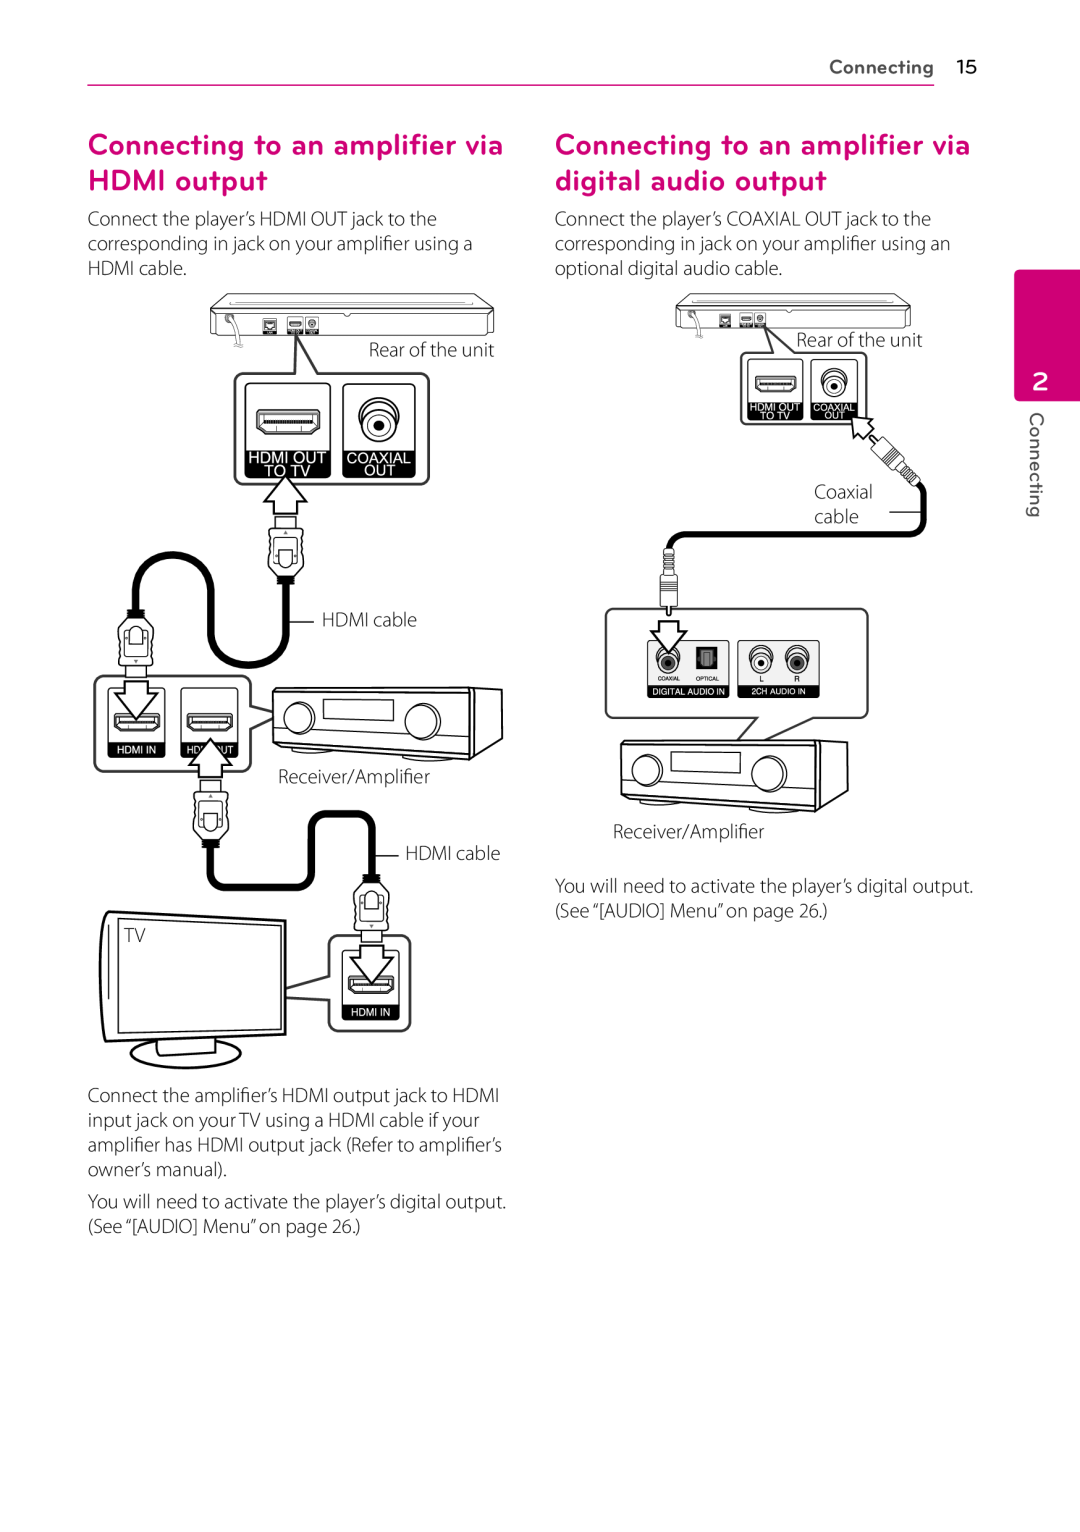 LG Electronics BP530 Connecting to an amplifier via HDMI output, Connecting to an amplifier via digital audio output 